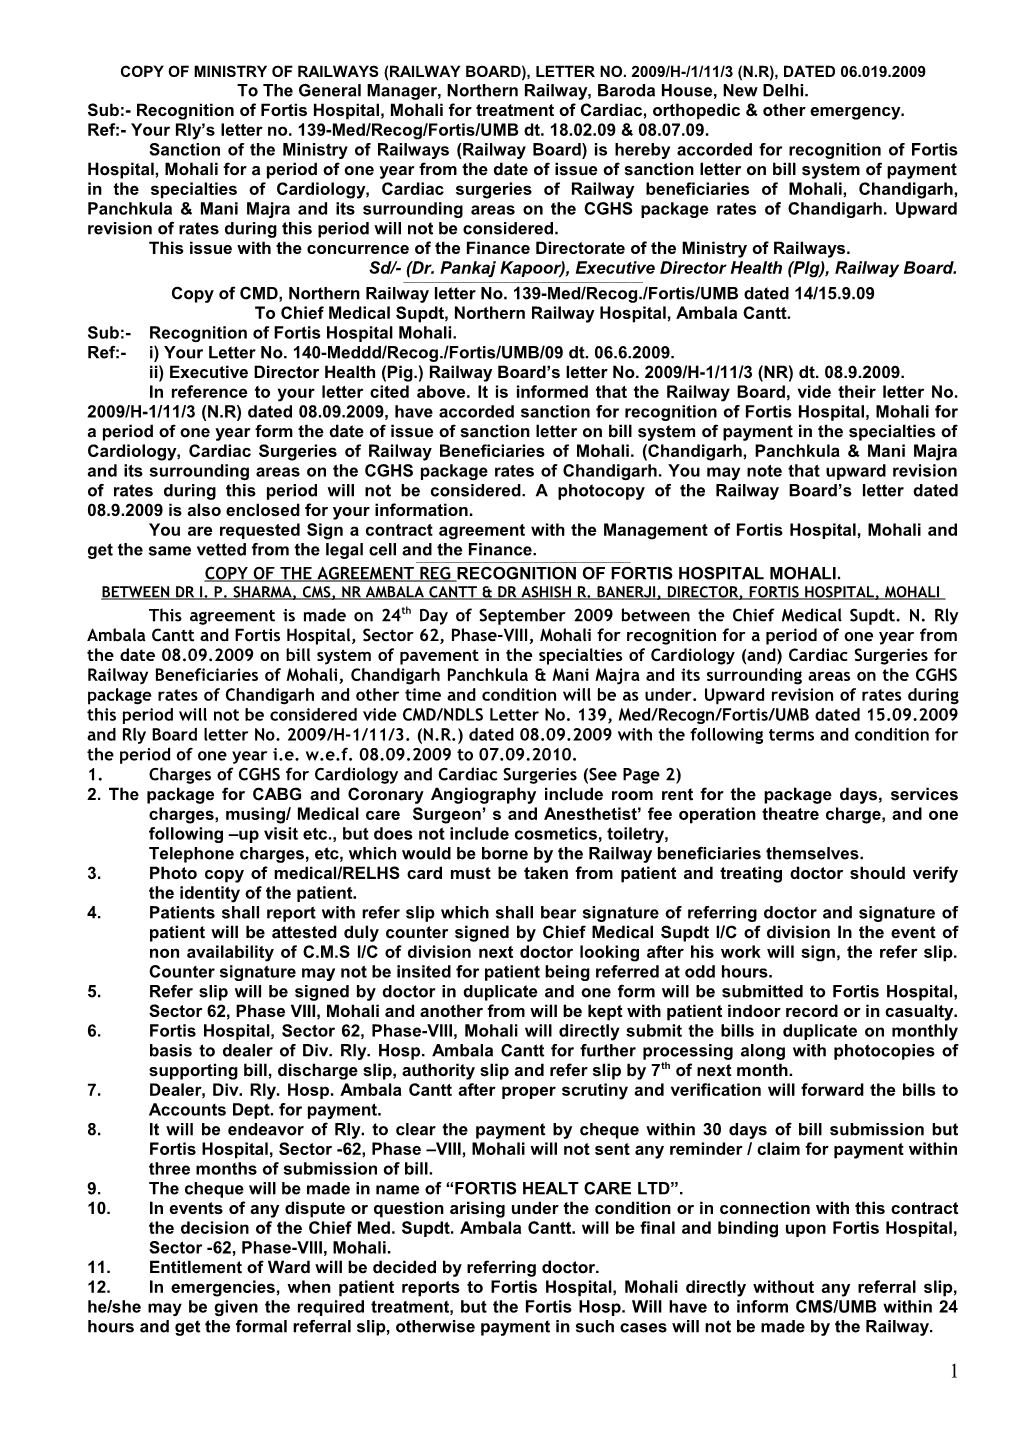 Copy of MINISTRY of RAILWAYS(RAILWAY BOARD), Letter No. 2009/H-/1/11/3 (N.R), Dated 06.019.2009